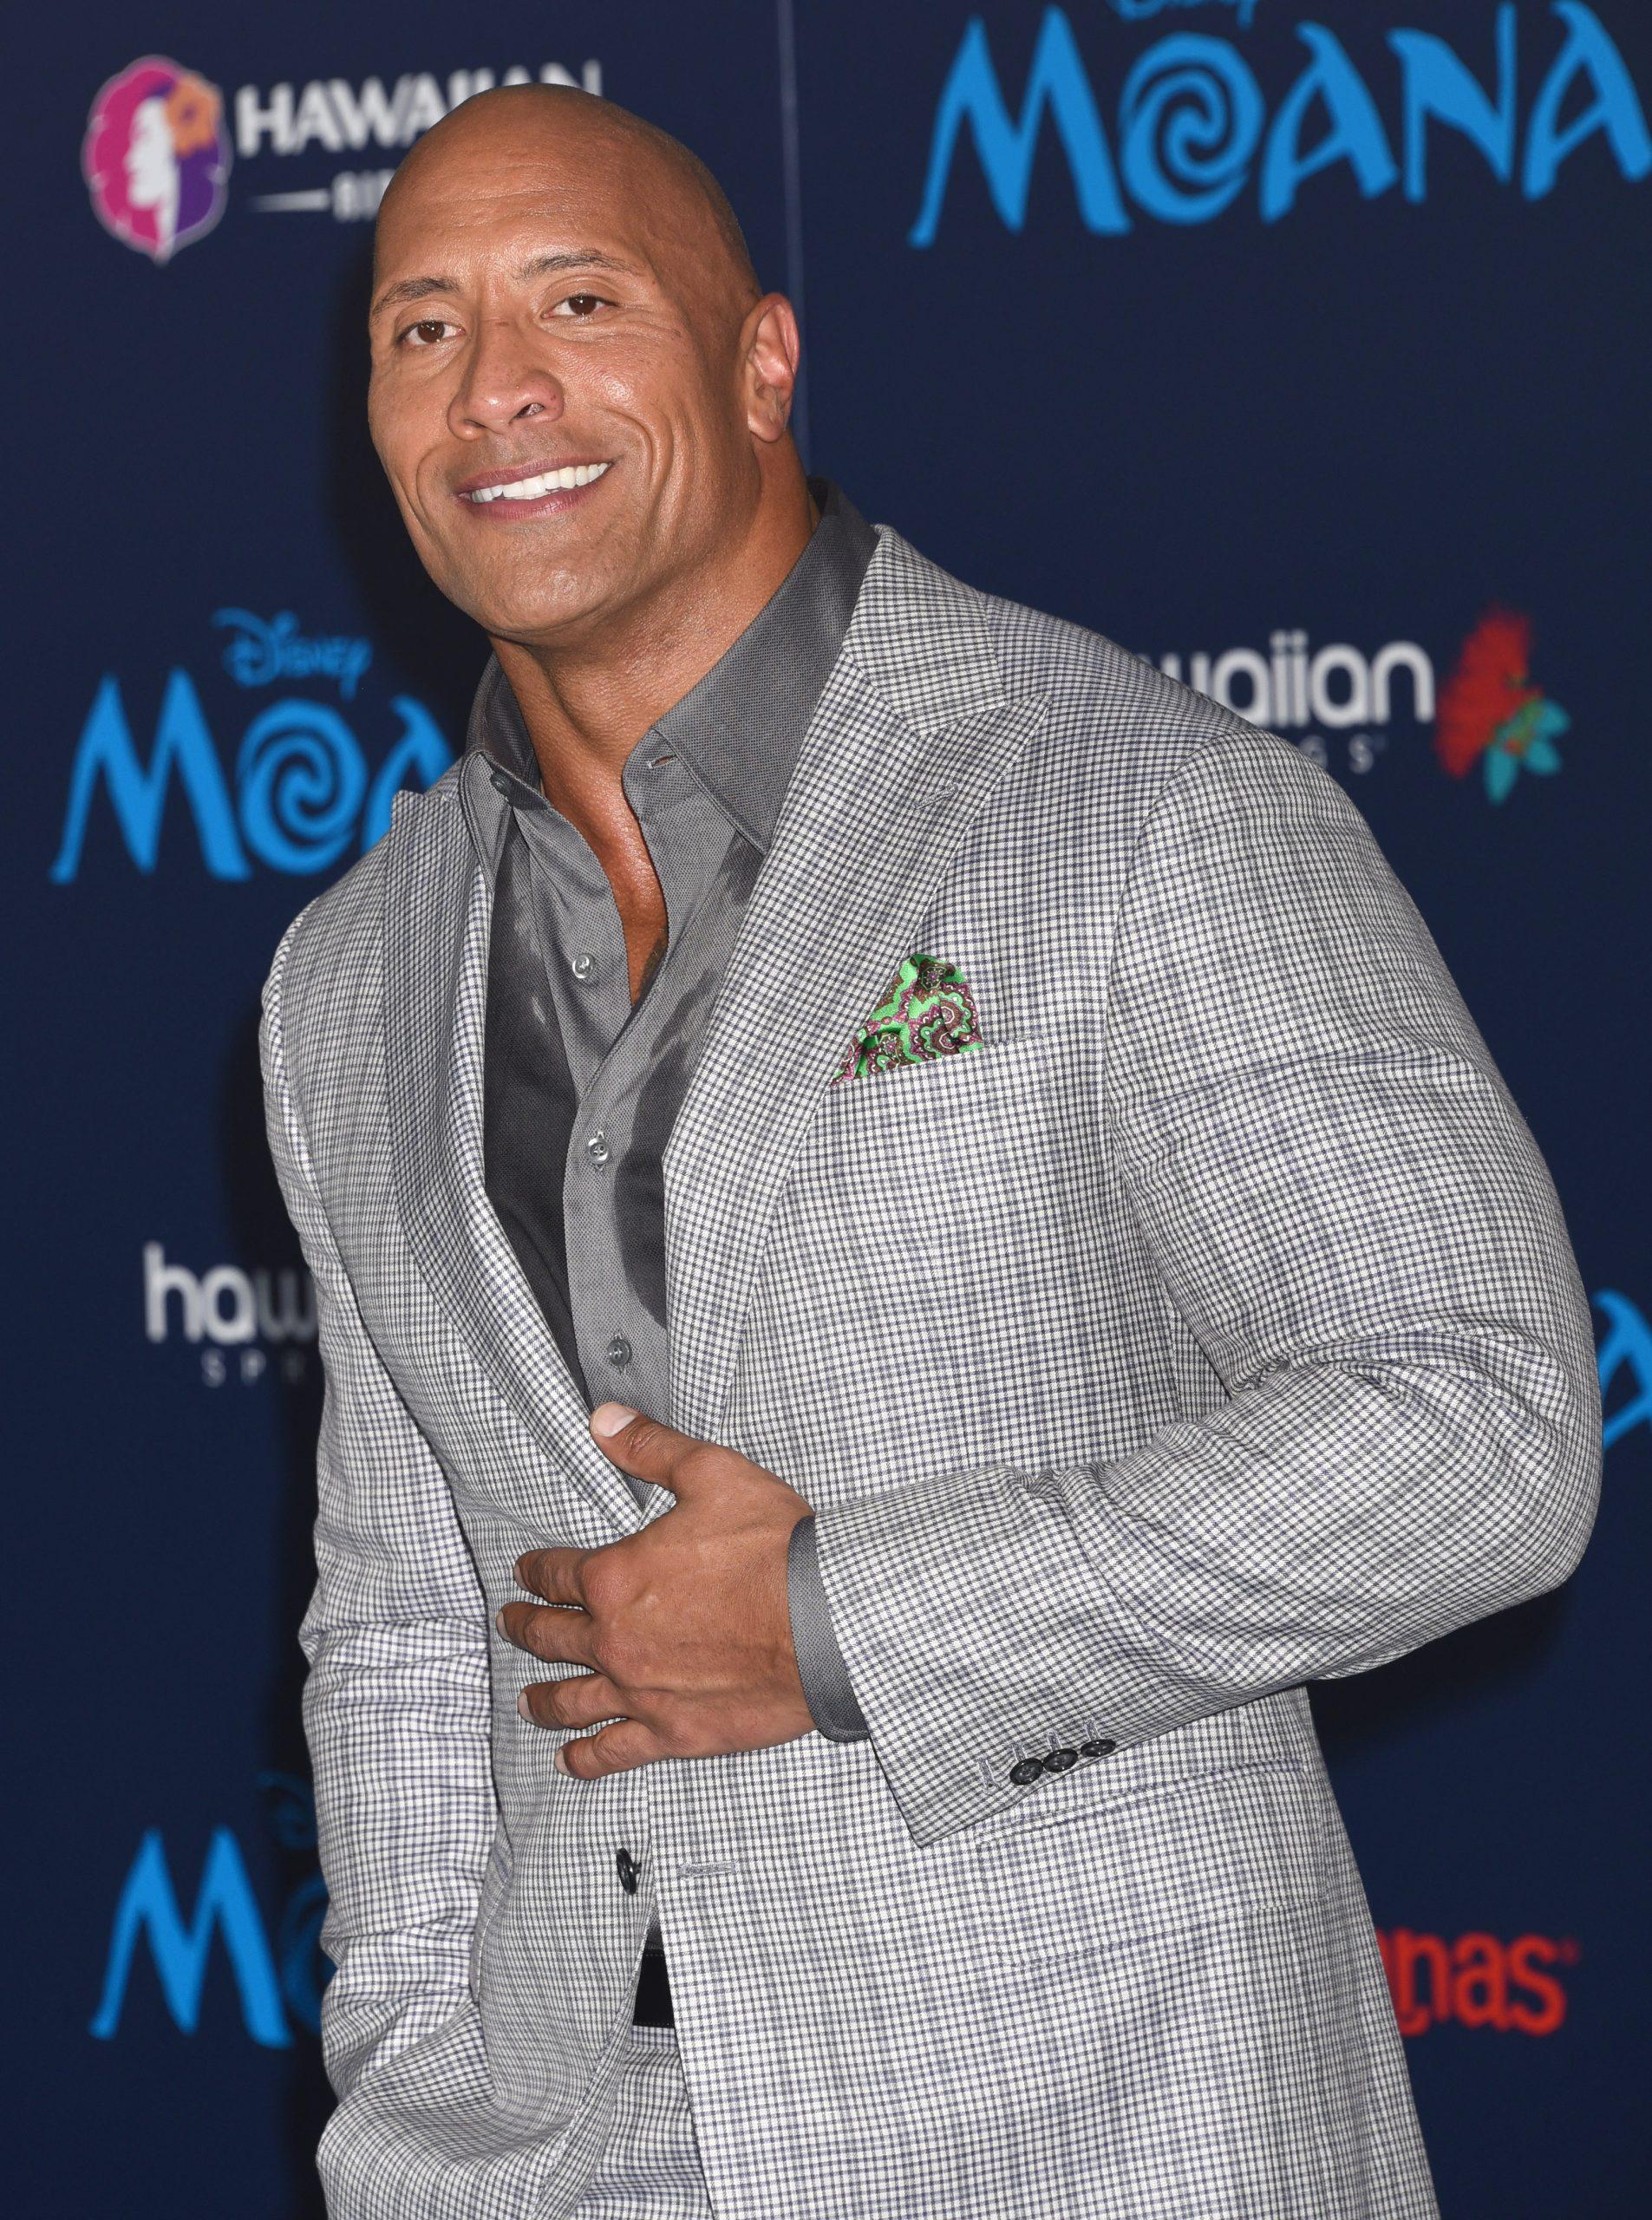 Dwayne 'The Rock' Johnson Confirms 'Moana' Live-Action Film Is In The Works